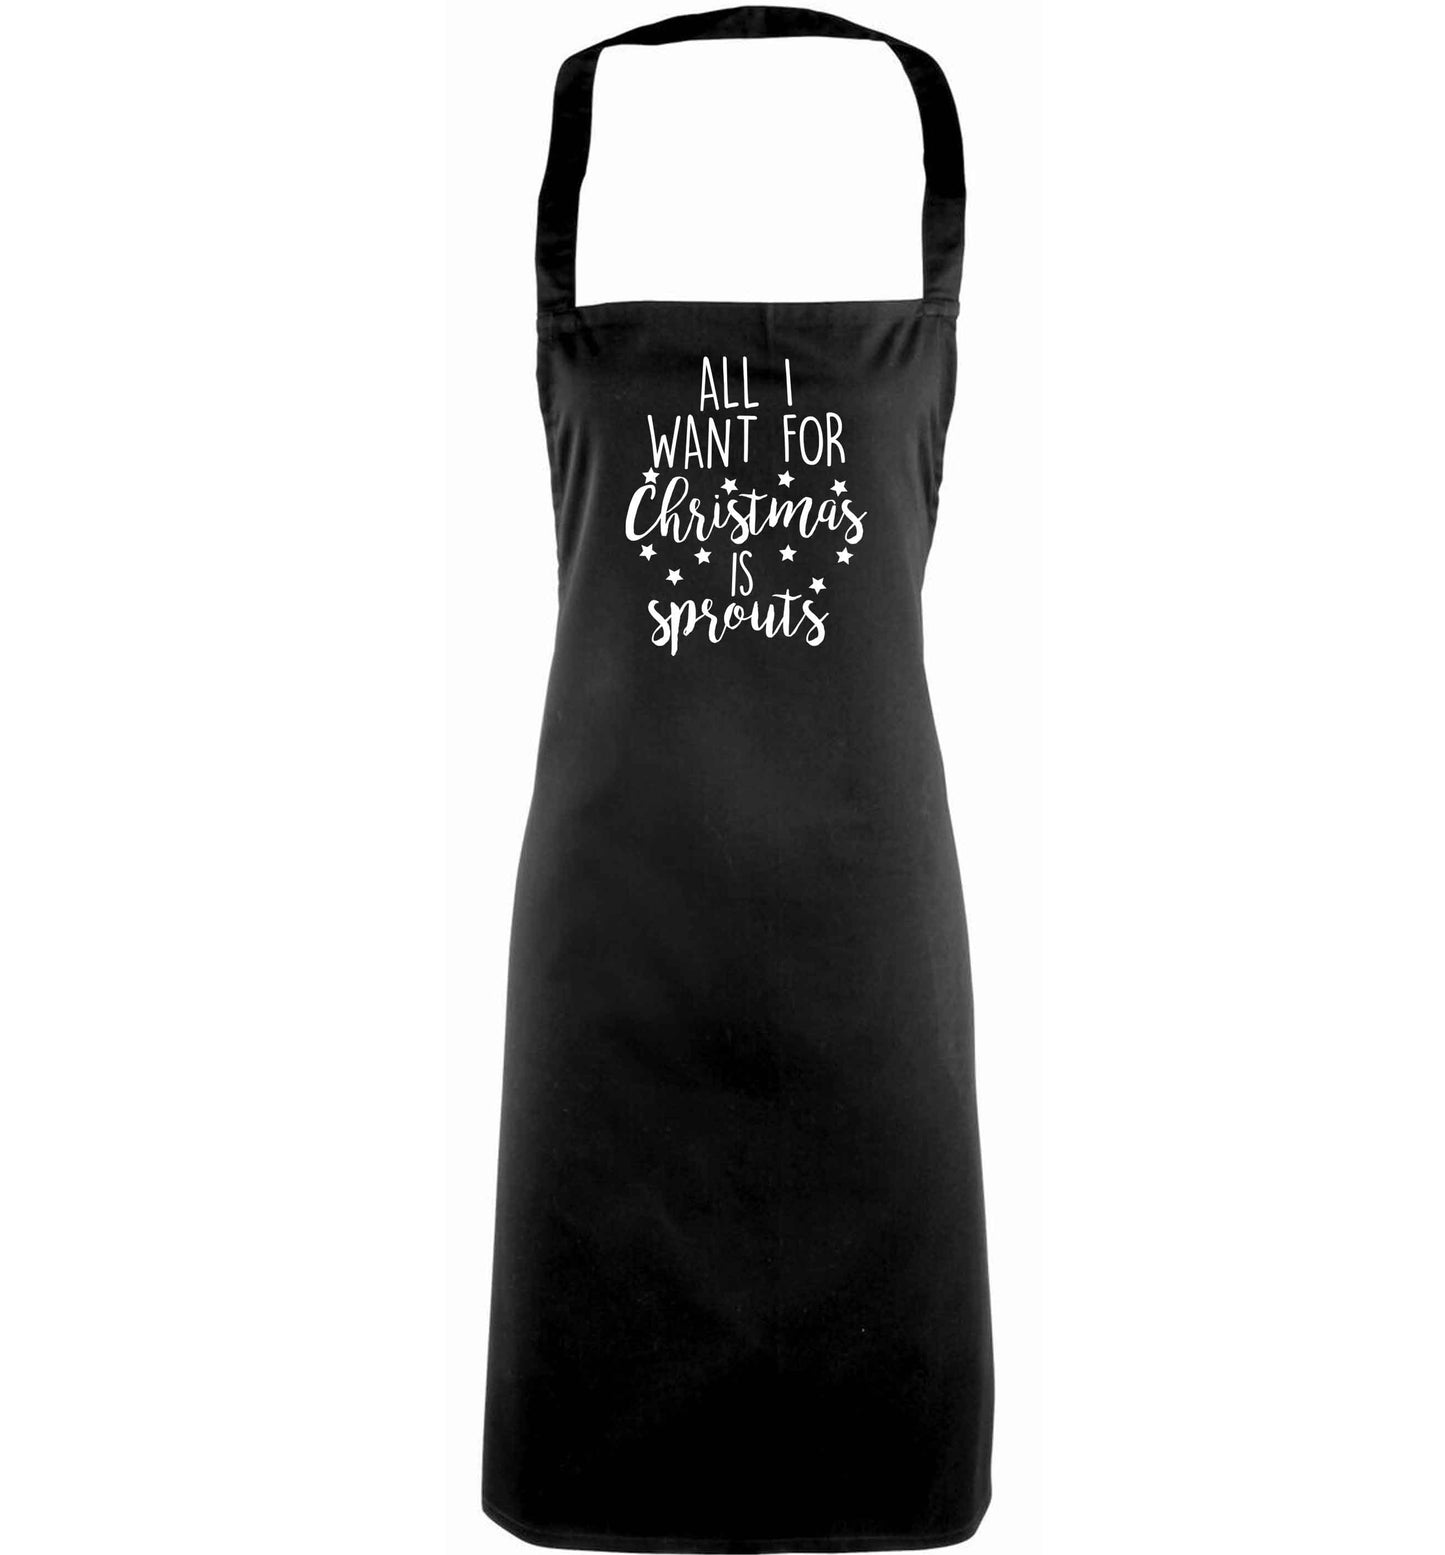 All I want for Christmas is sprouts adults black apron